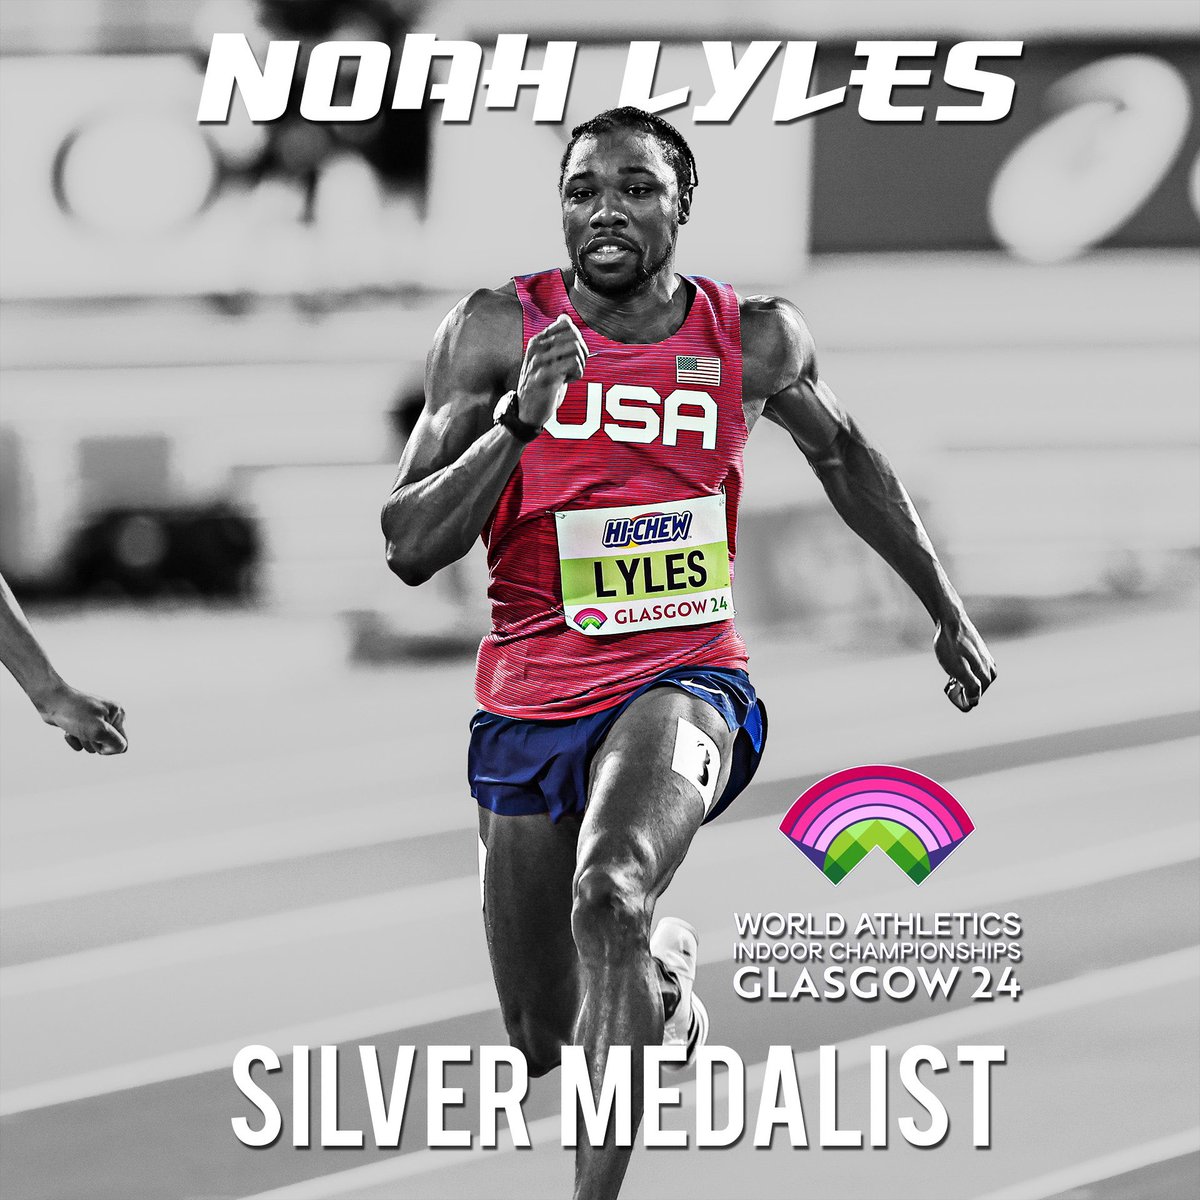 Congratulations to @LylesNoah for winning his second 🥈 of @wicglasgow24 as a member of the @TeamUSA 4x400m relay!!